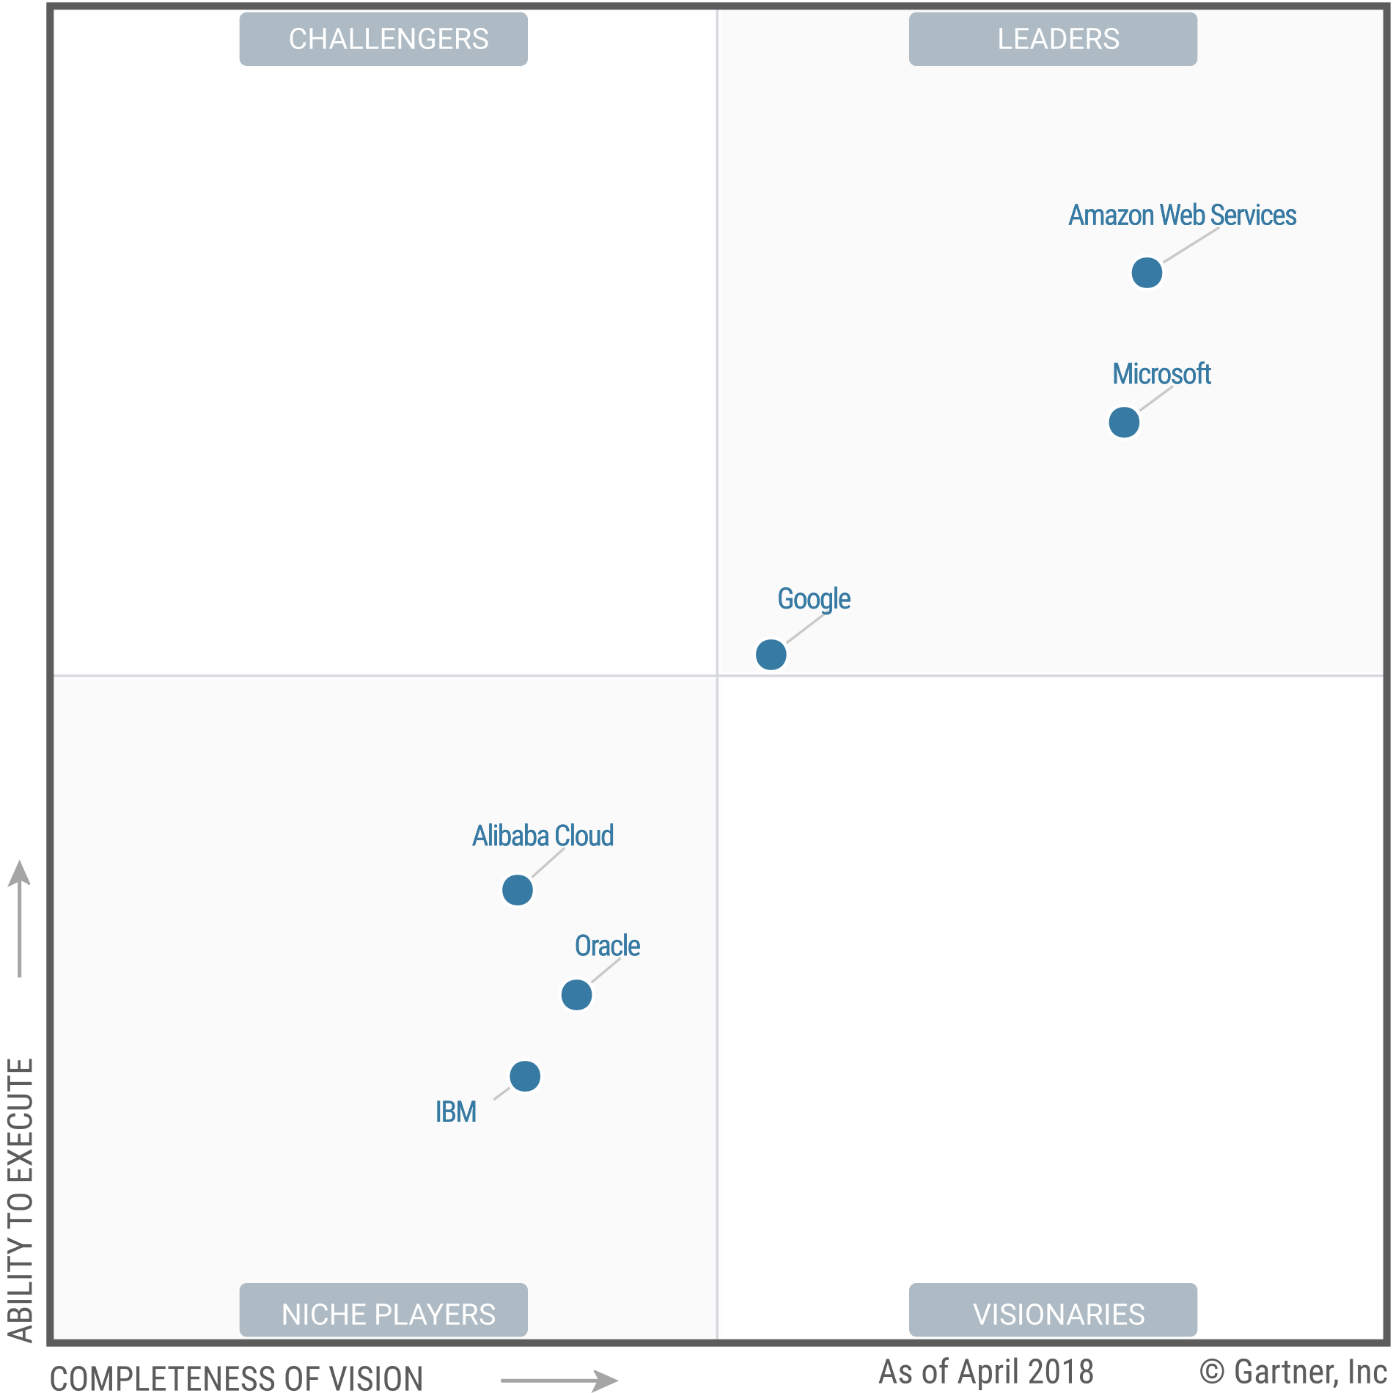 Magic Quadrant for Cloud Infrastructure as a Service, Worldwide